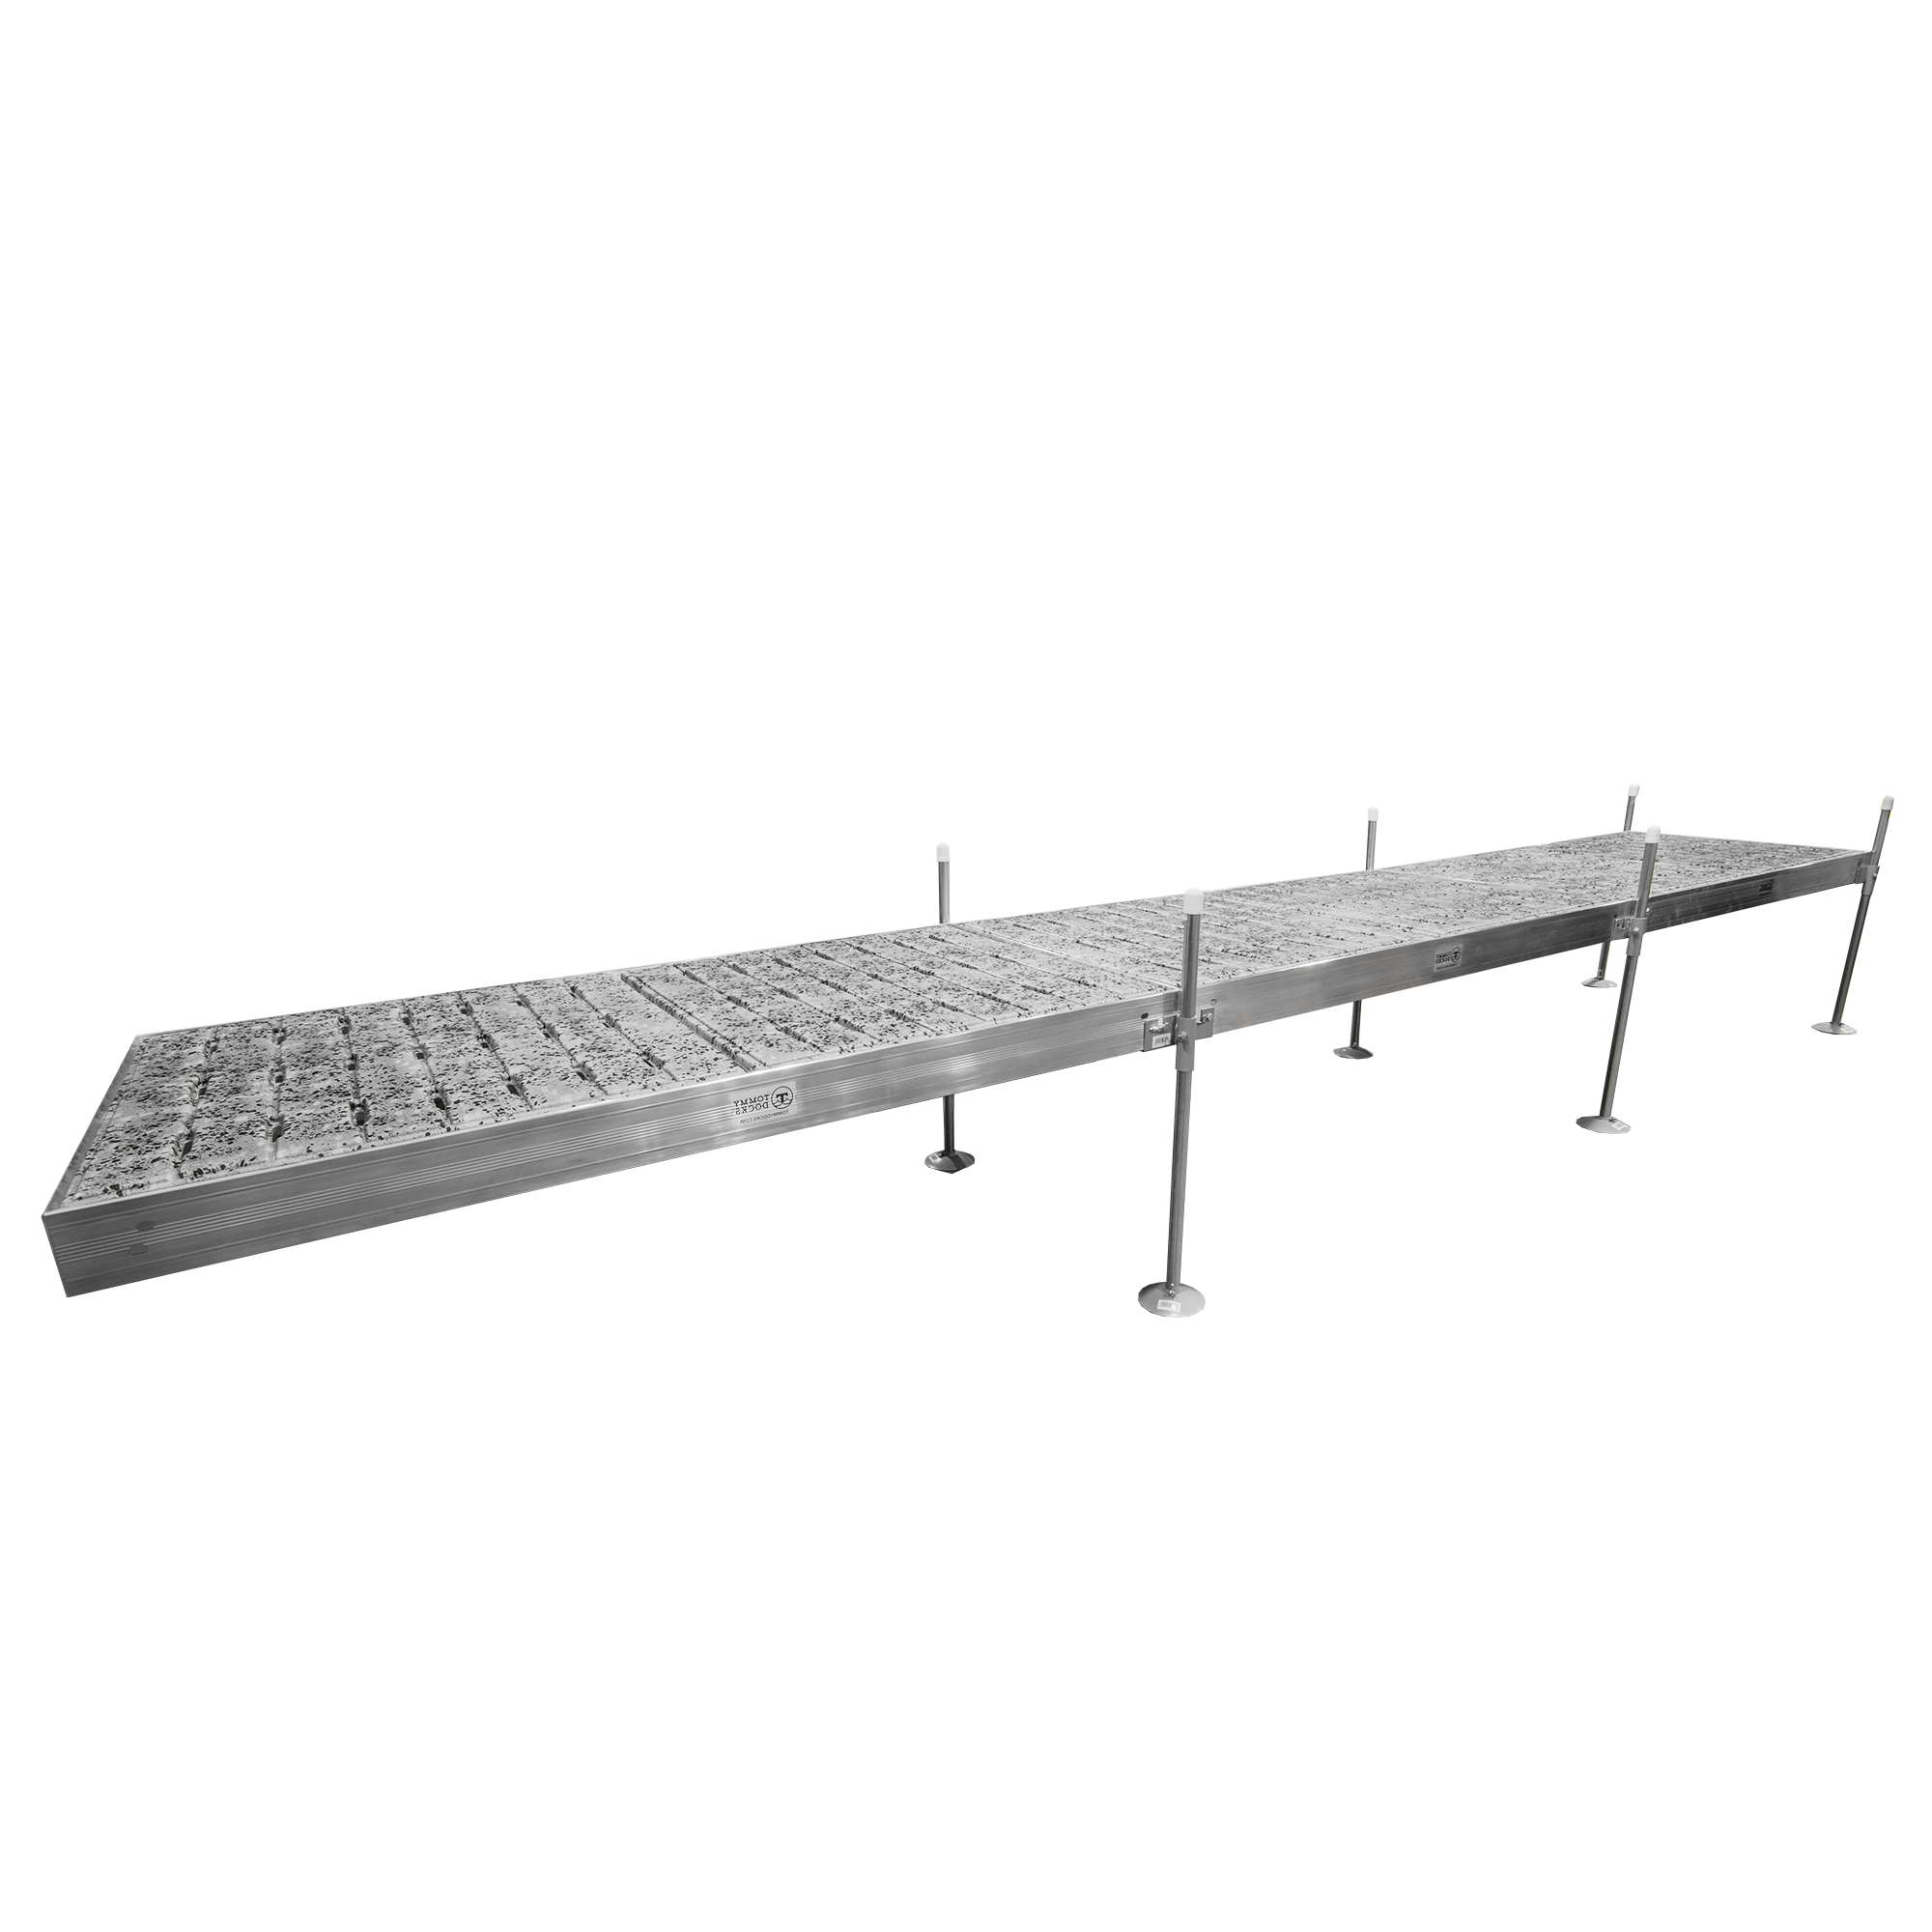 24' Straight Boat Dock System with Aluminum Frame and Thermoformed Terrazzo Decking